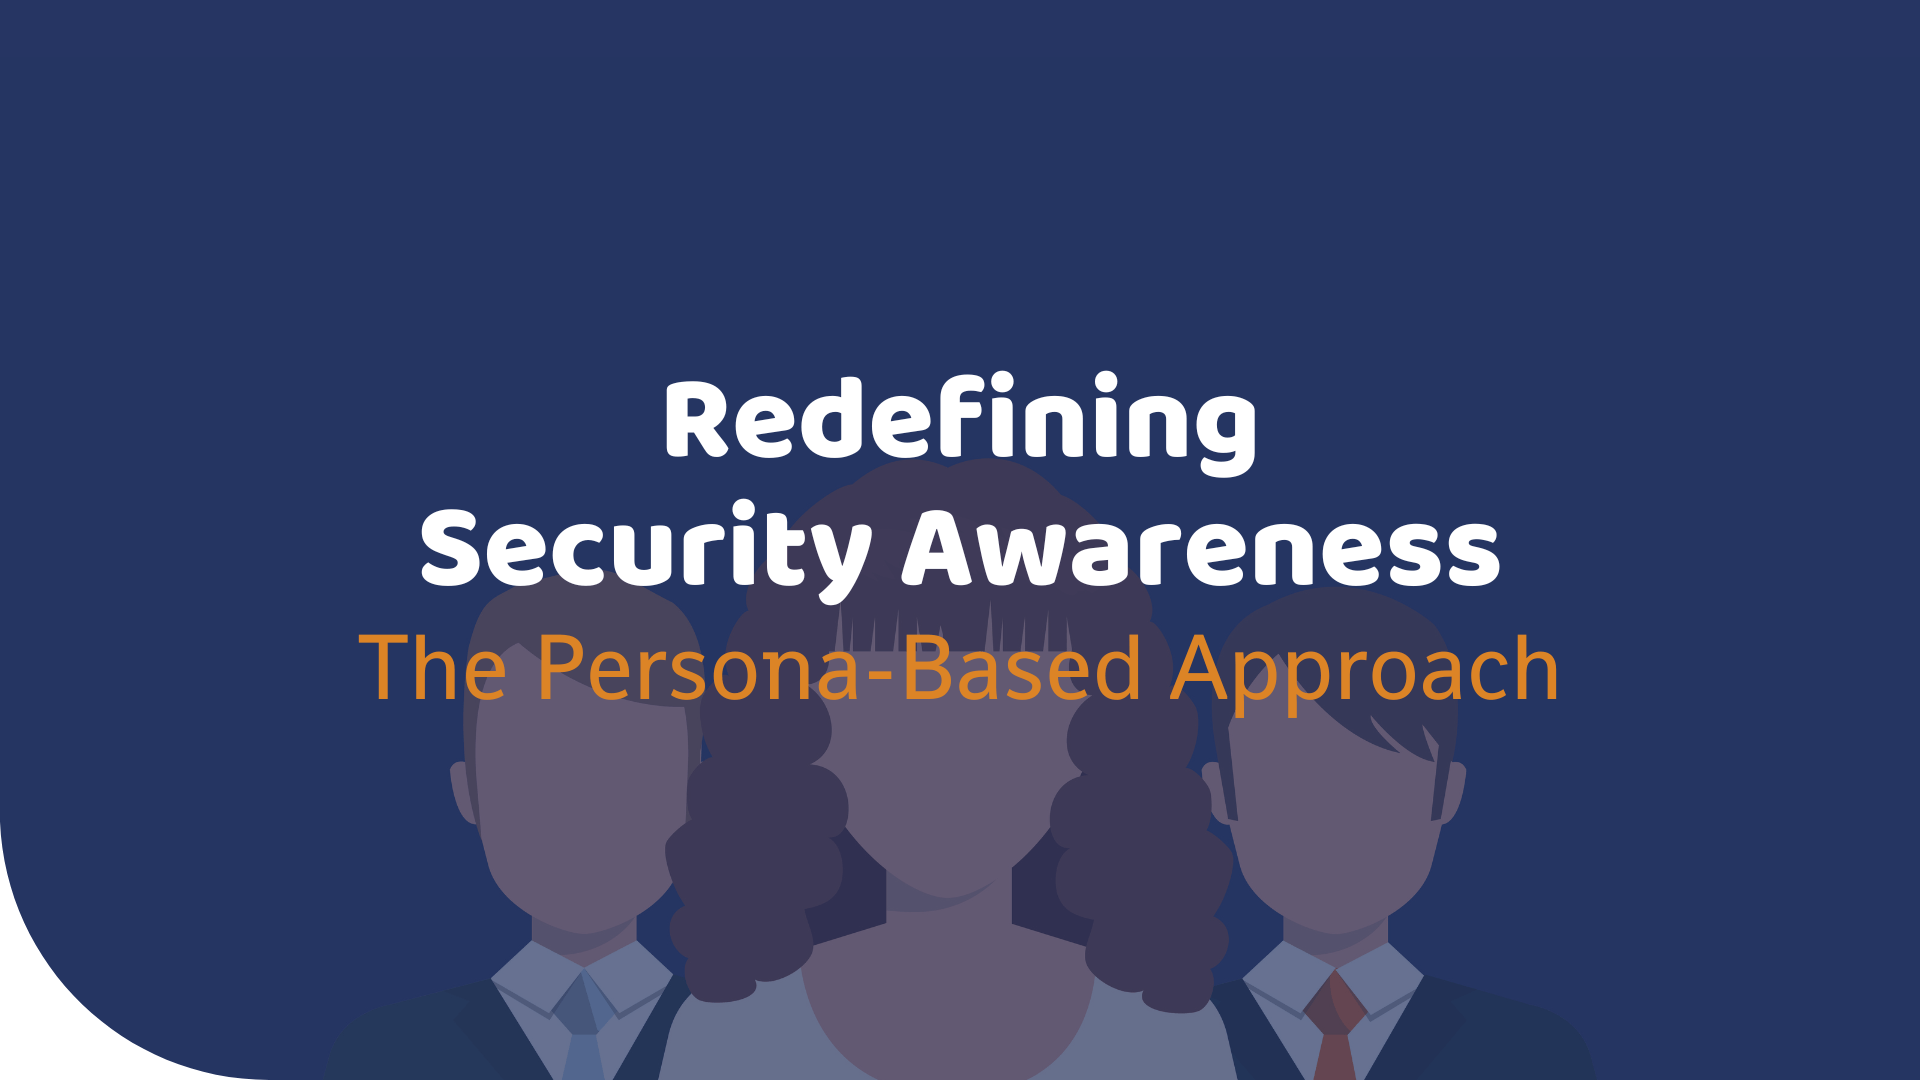 Redefining Security Awareness: The Persona-Based Approach